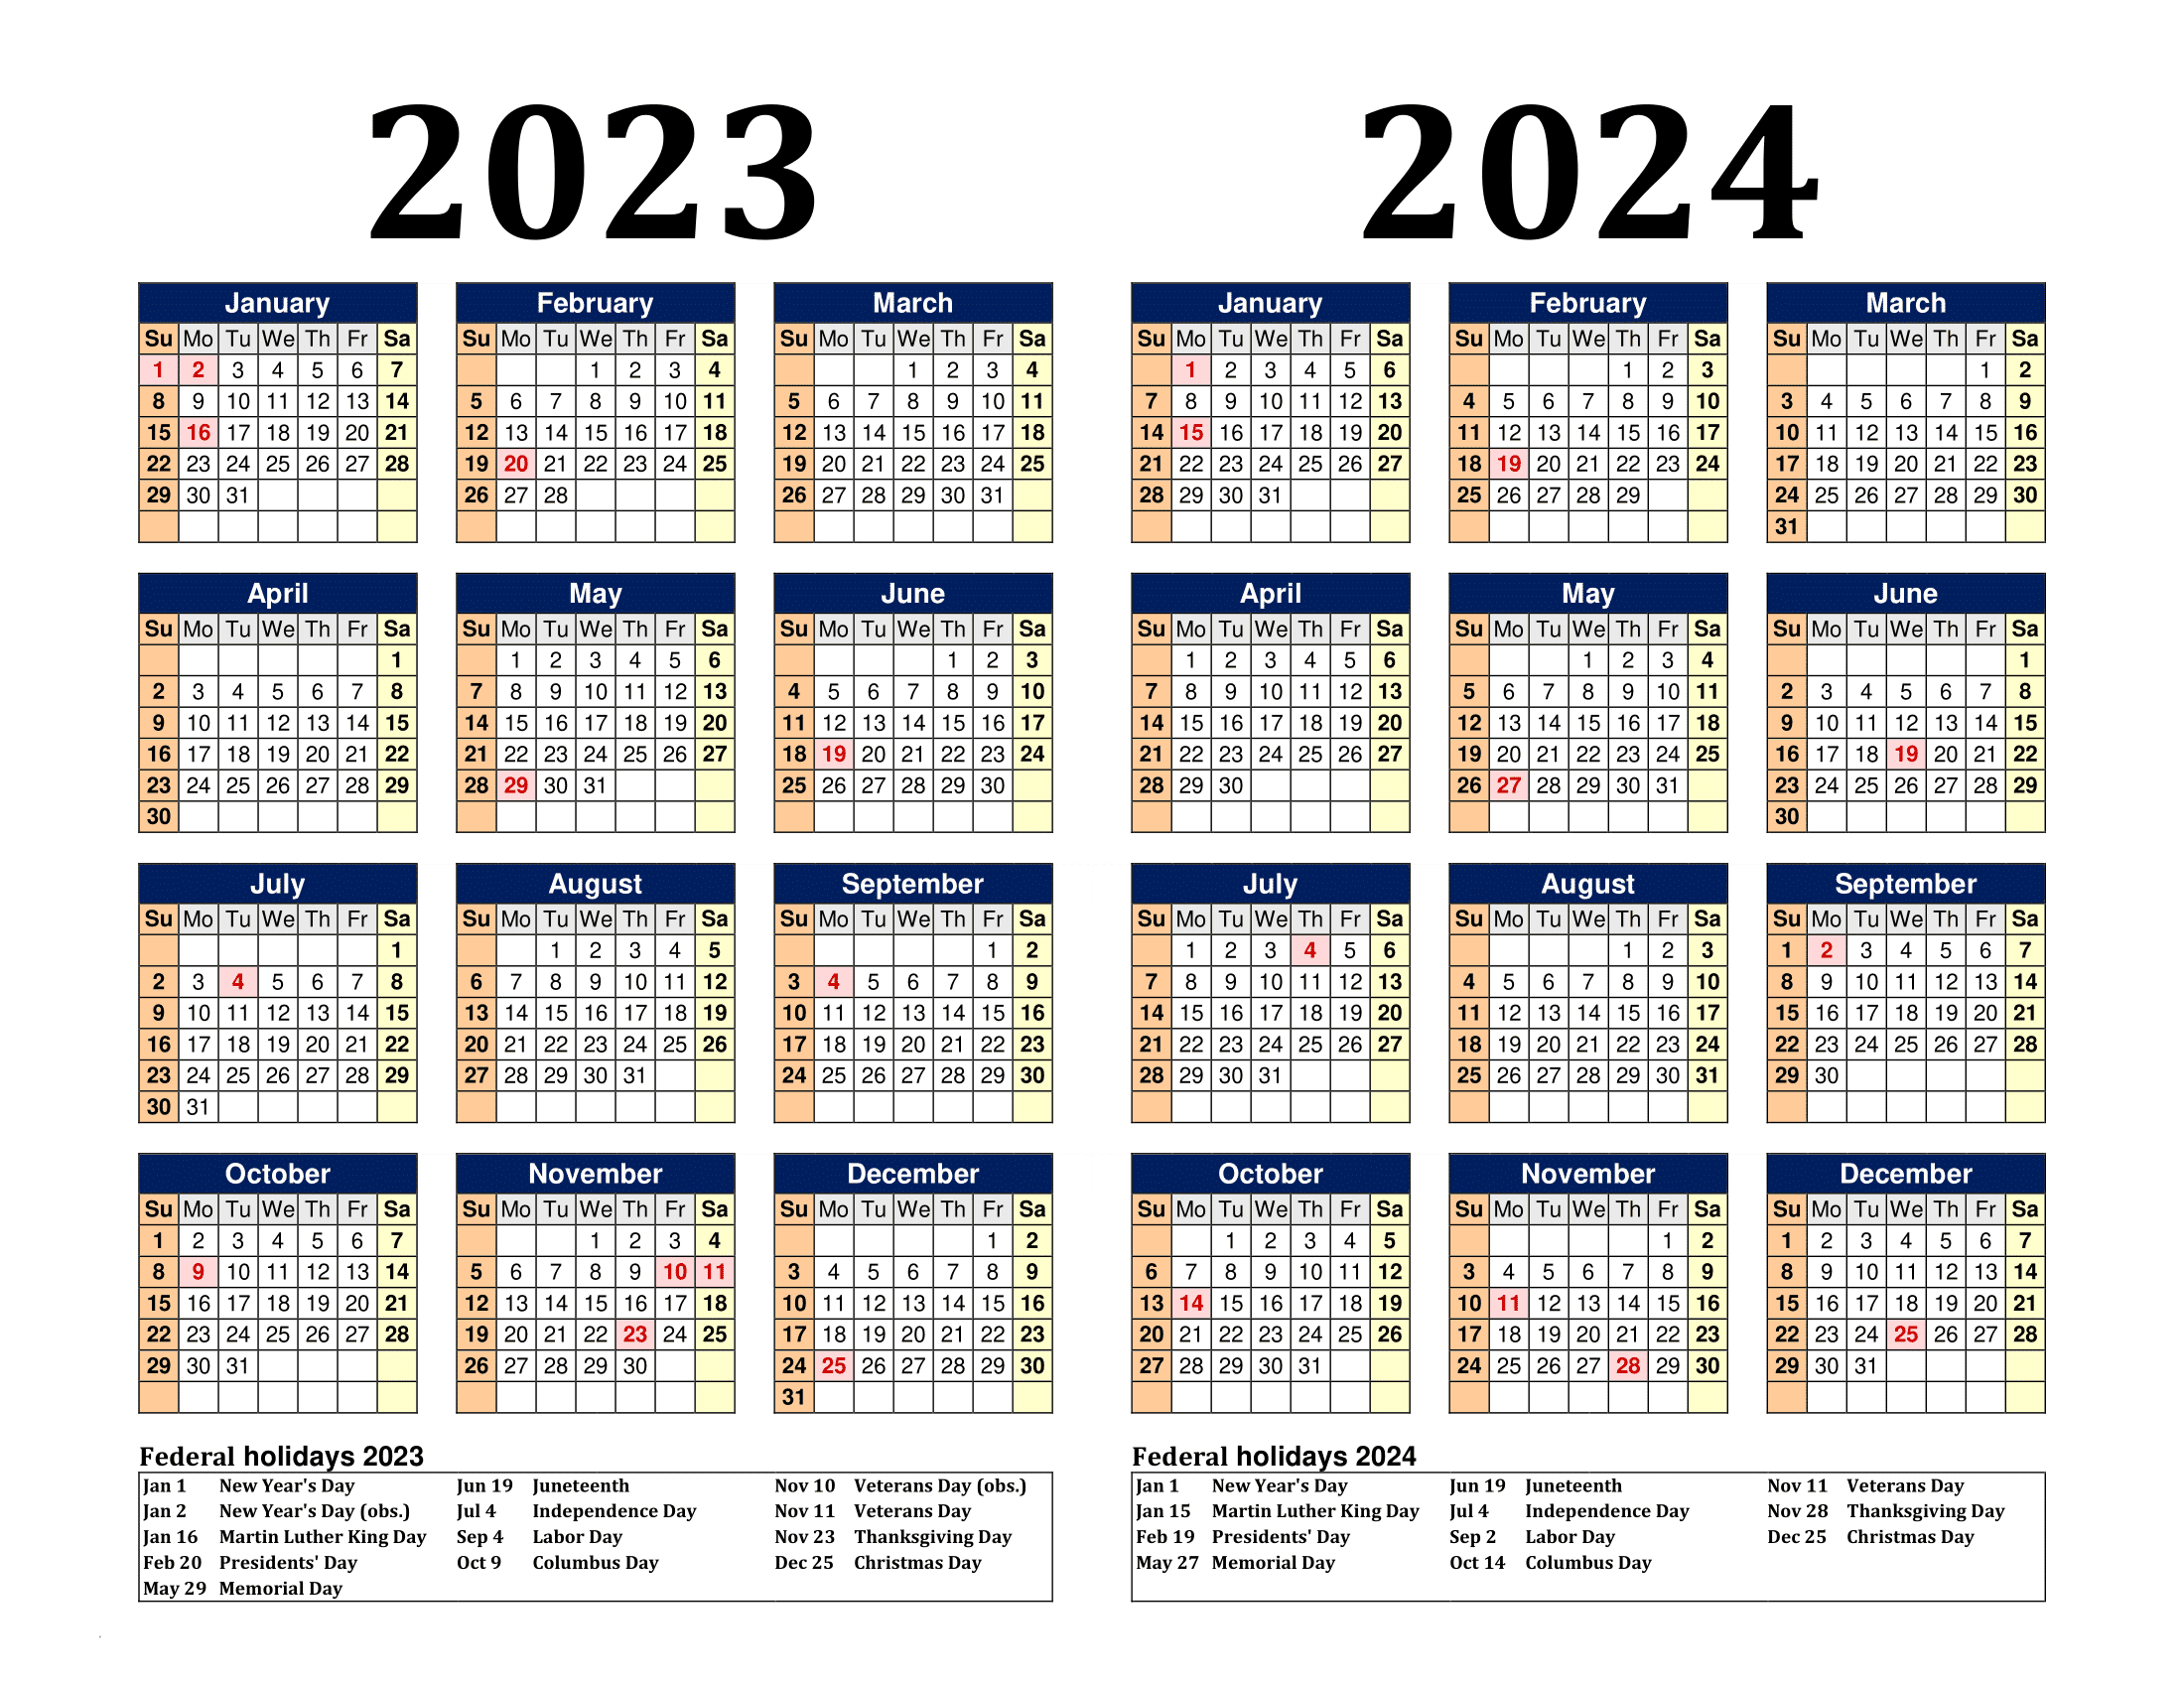 Free Printable Two Year Calendar Templates For 2023 And 2024 In Pdf | Printable Calendar For Year 2024 United States